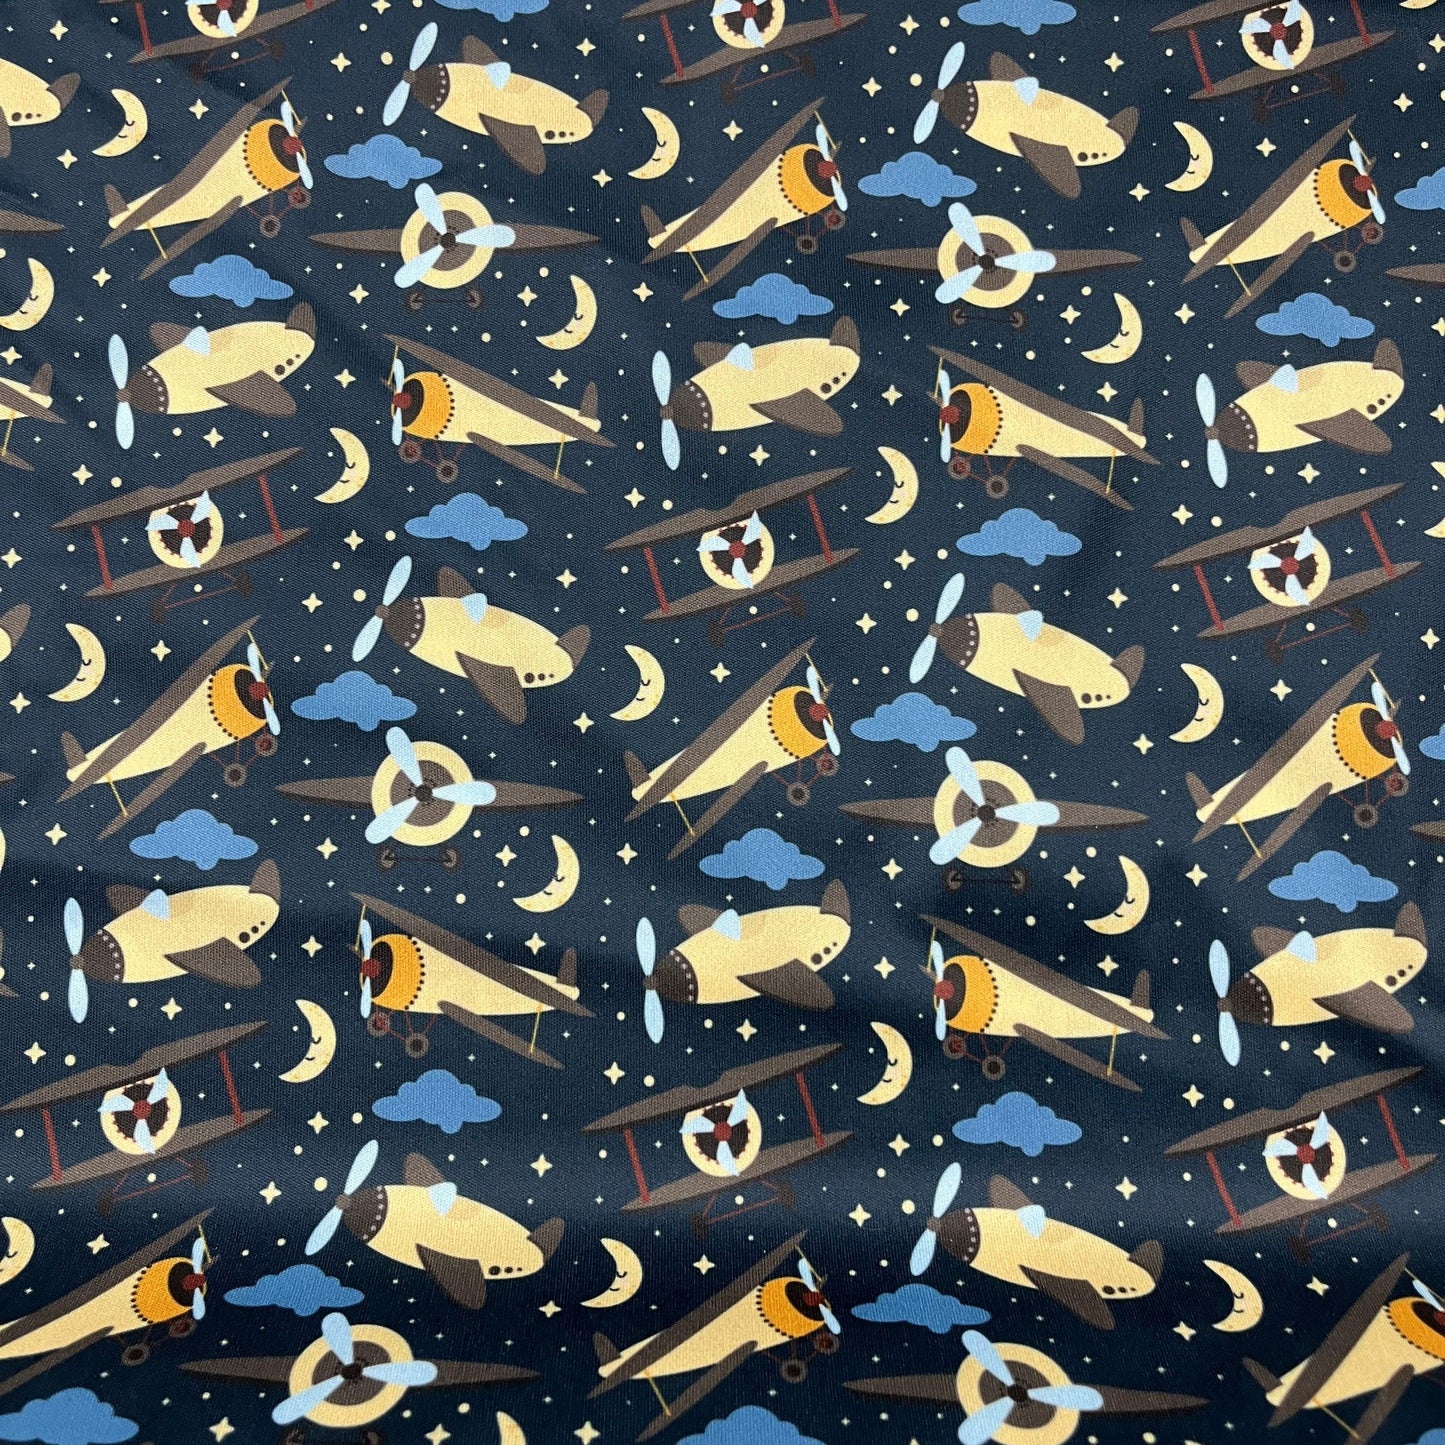 Airplanes at Night 1 mil PUL Fabric - Made in the USA - Nature's Fabrics